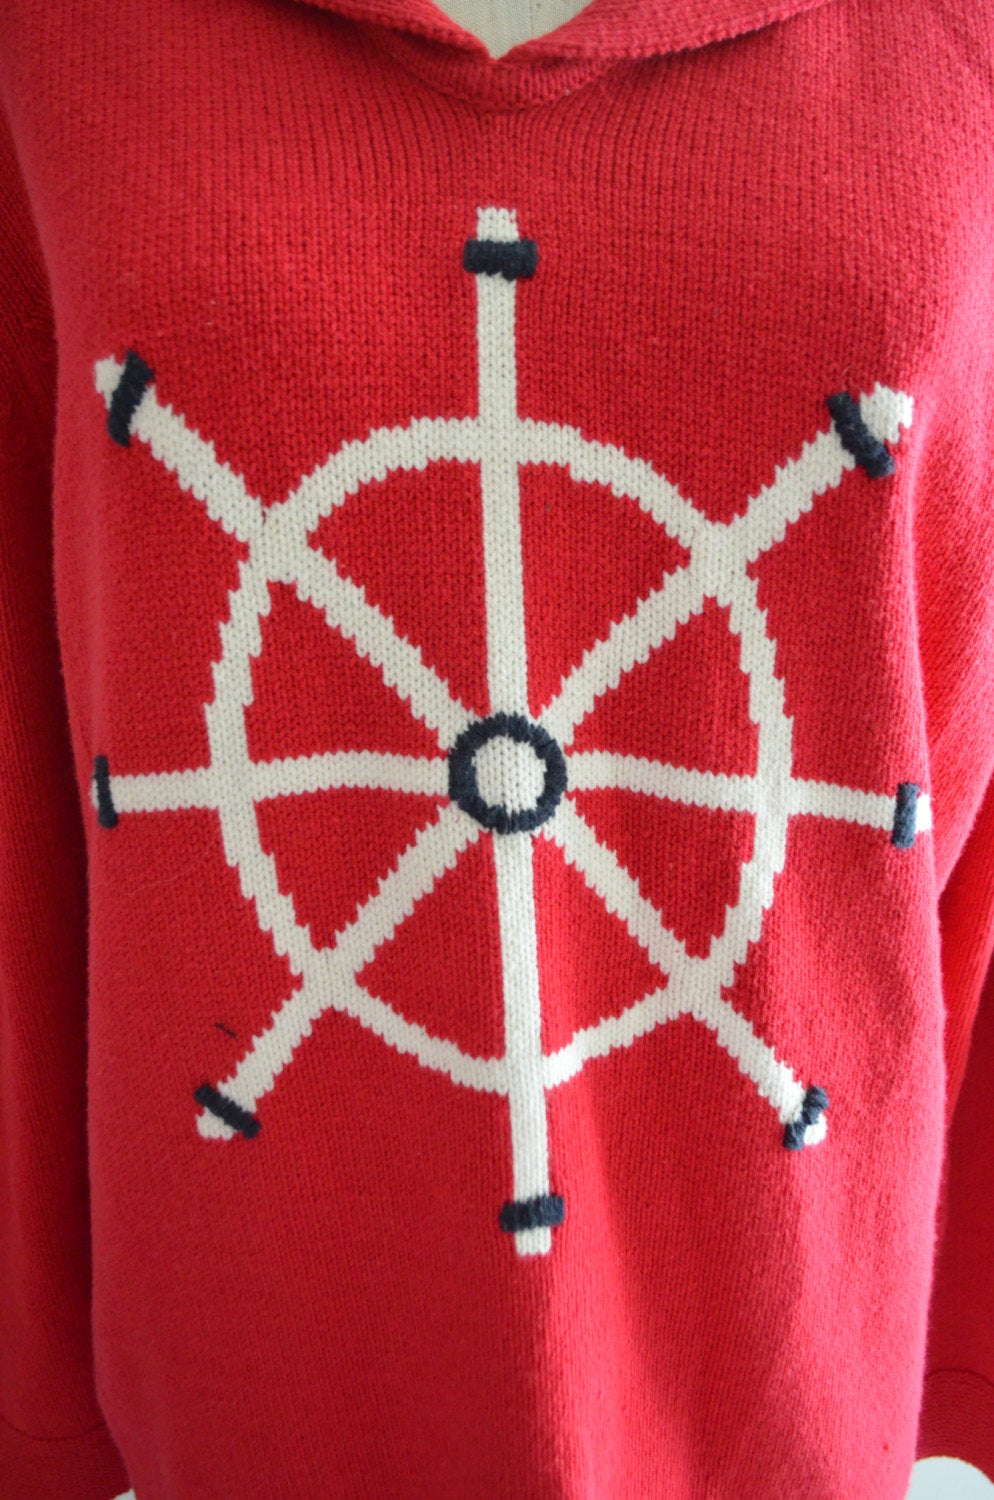 Sailor Red Top Liz Claiborne Villager Red Sailor Rudder/ Knitted Cardigan Sweaters Blouse